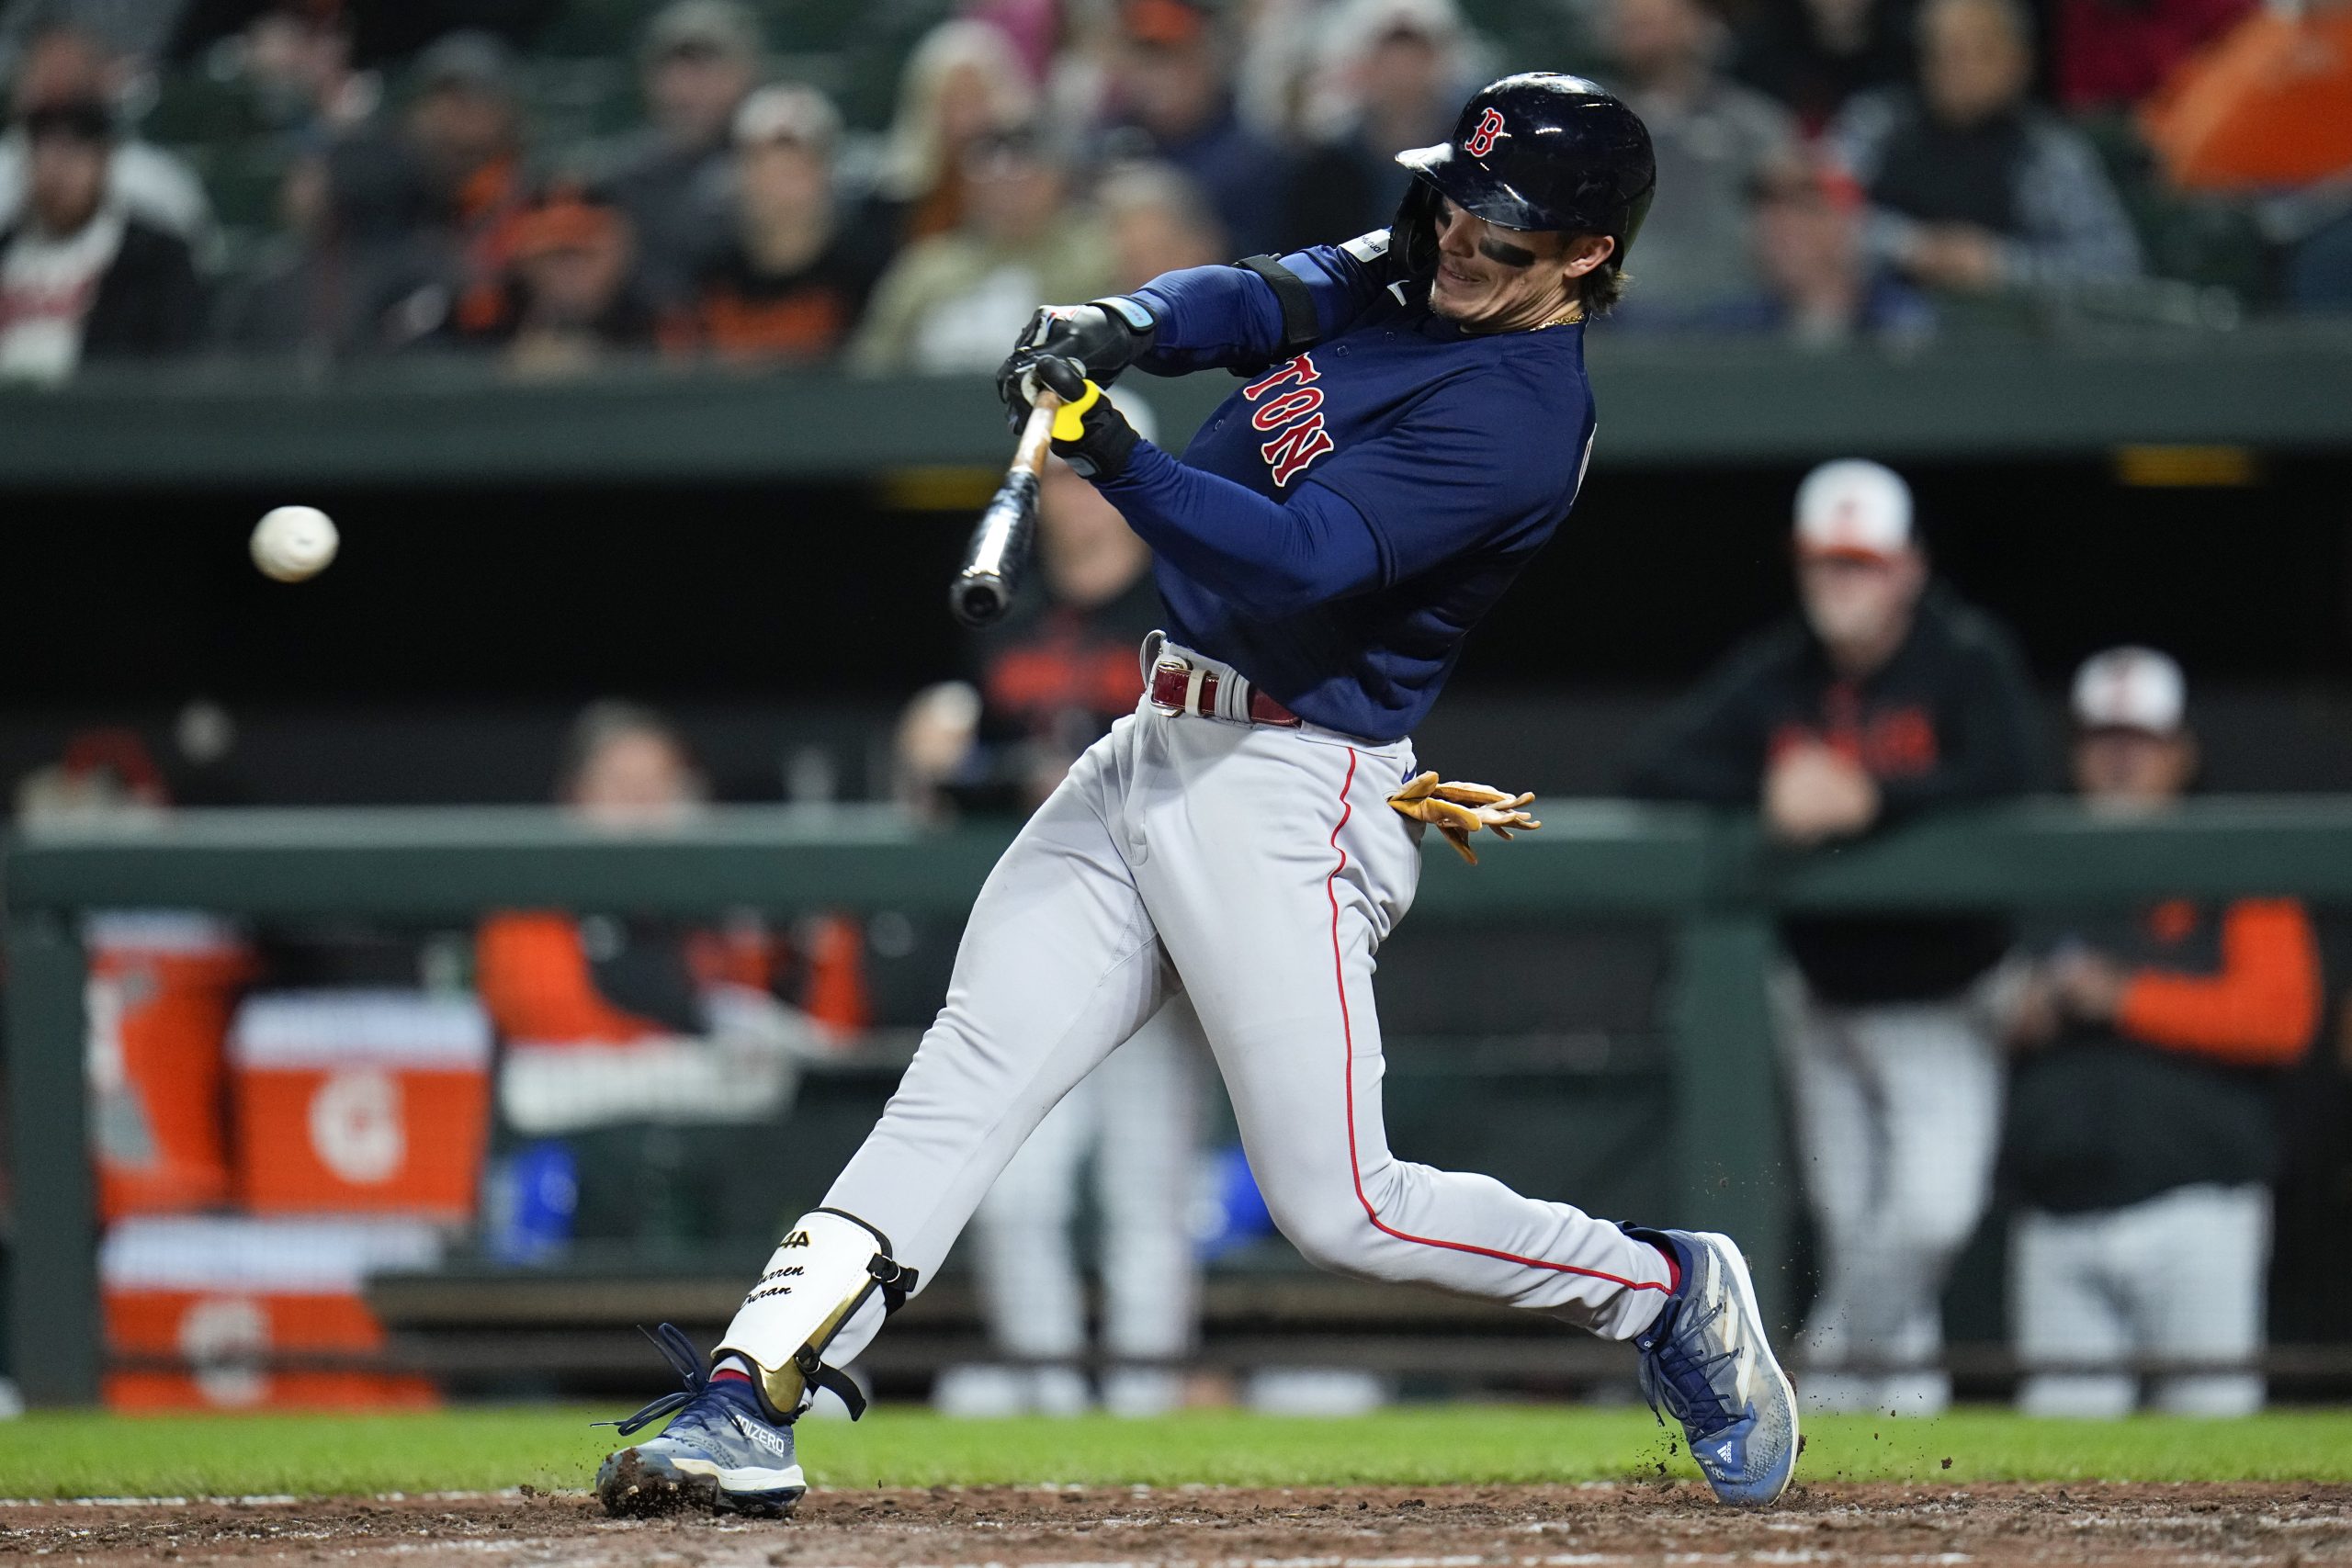 Duran provides spark, Red Sox snap Orioles' 7-game win streak